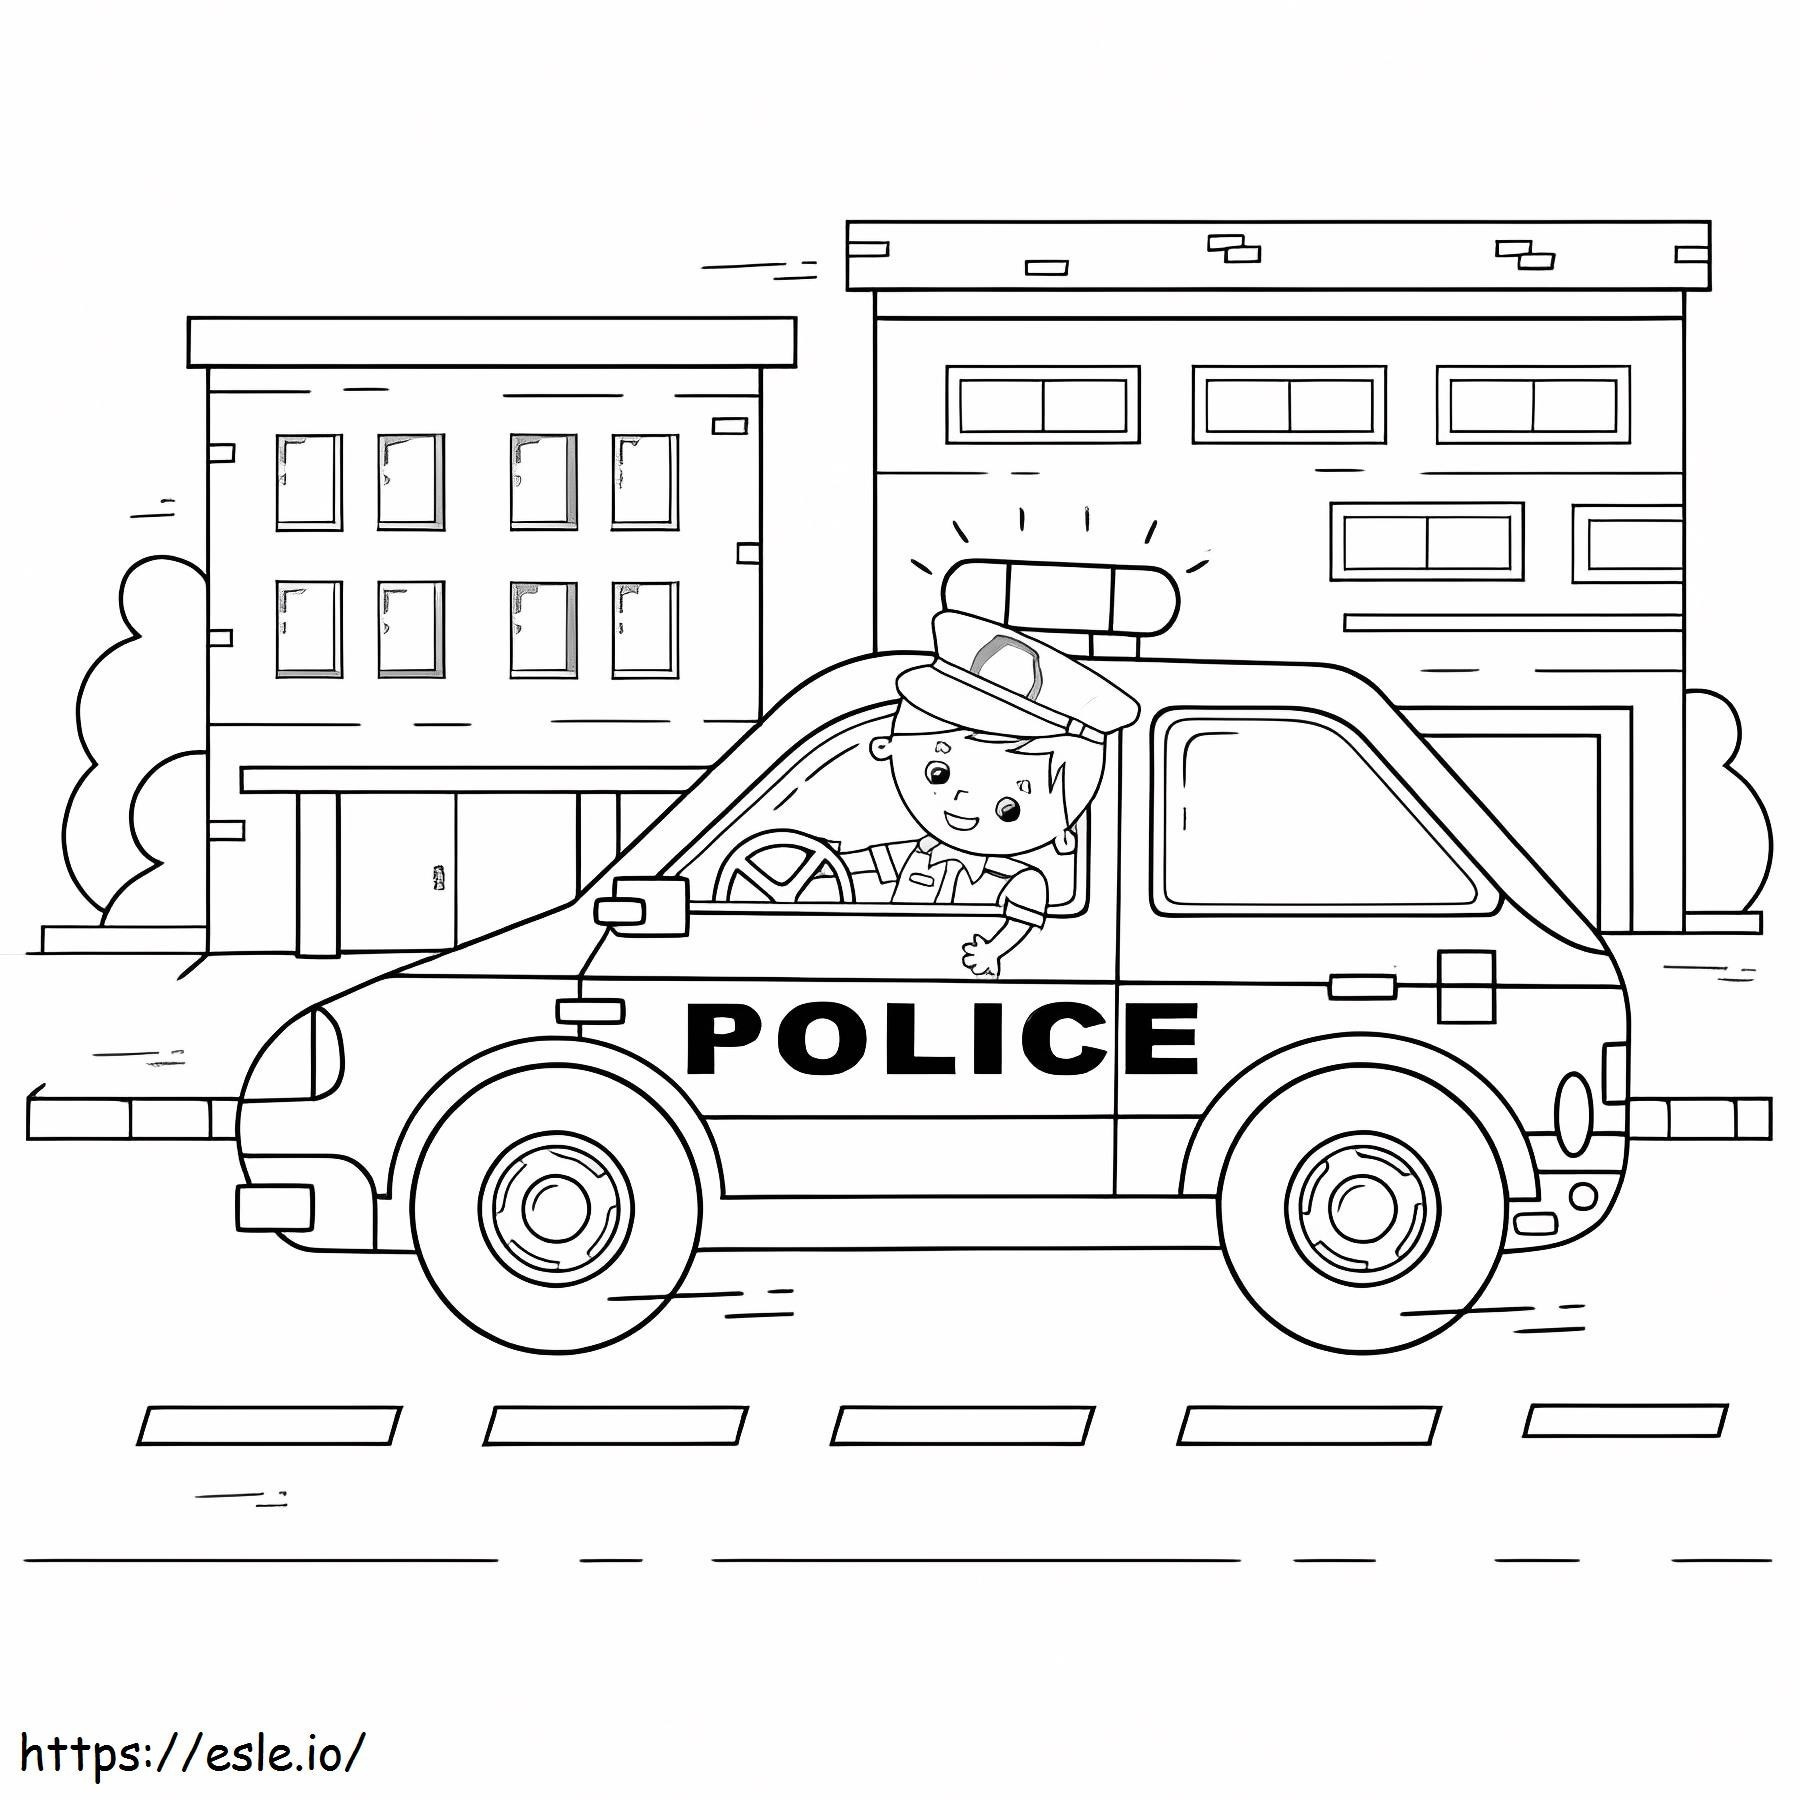 Basic Police In The Car coloring page